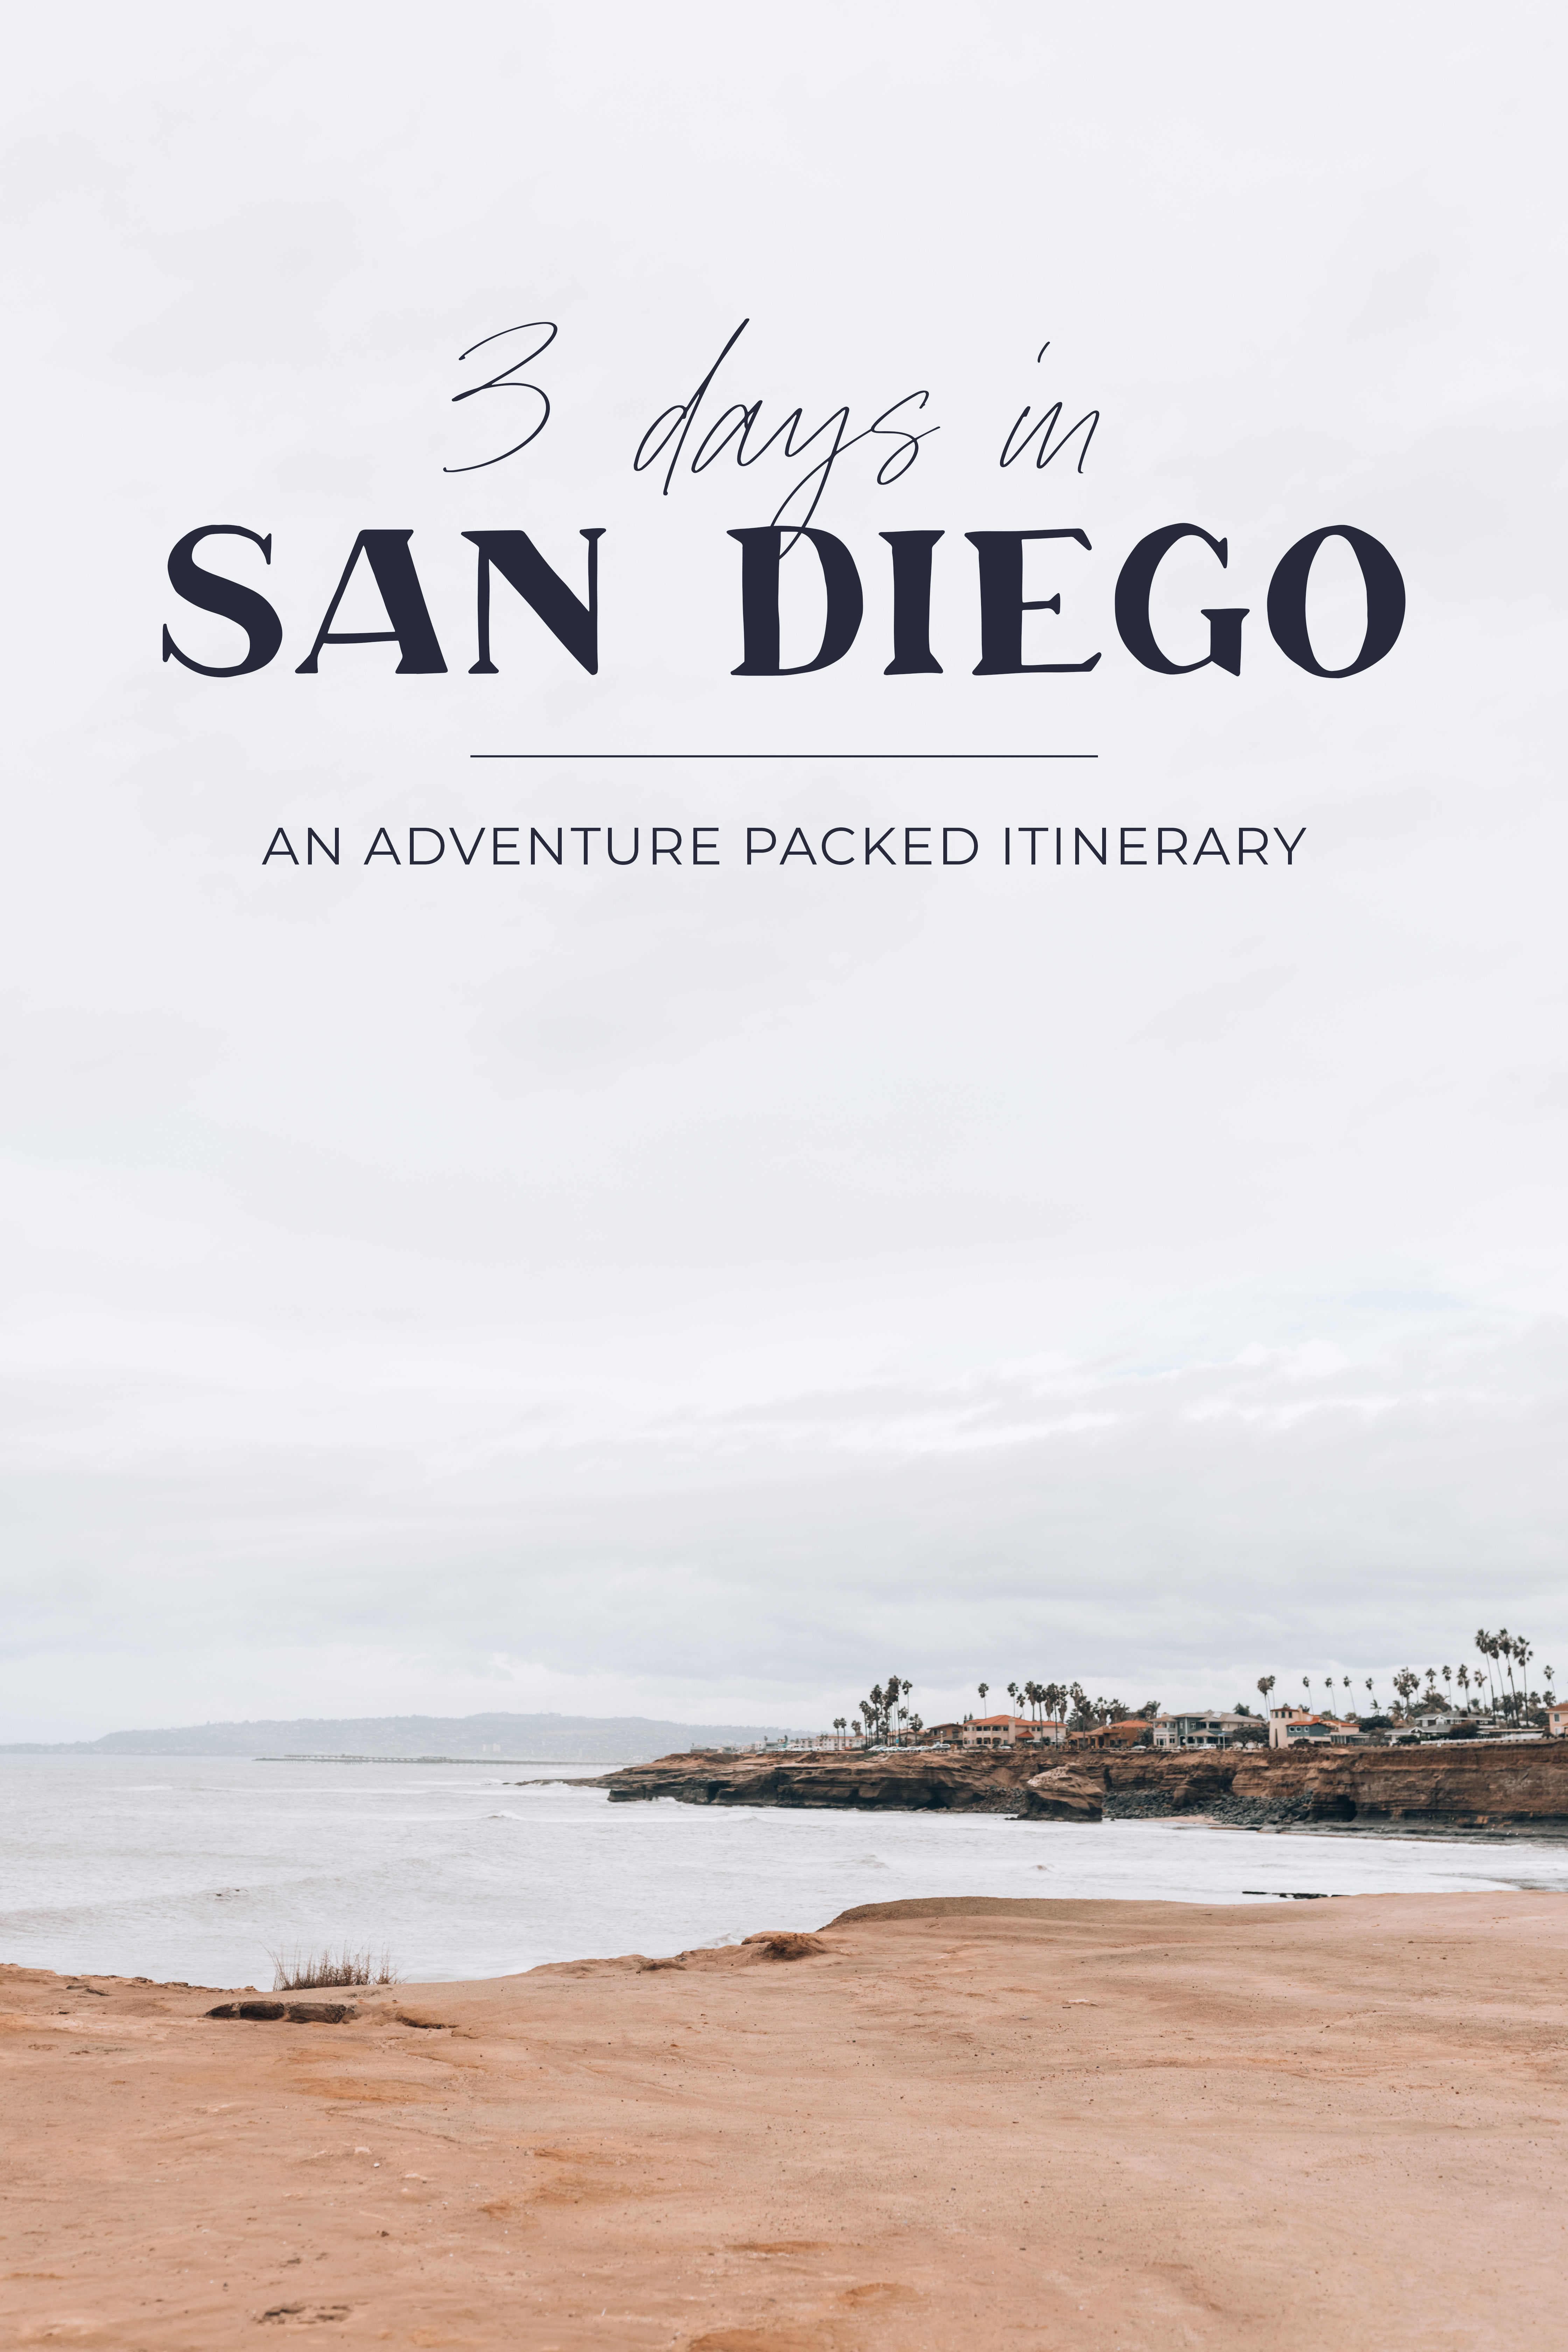 Photo of Sunset Cliffs in San Diego with text overlay that reads "3 Days in San Diego: An Adventure Packed Itinerary"